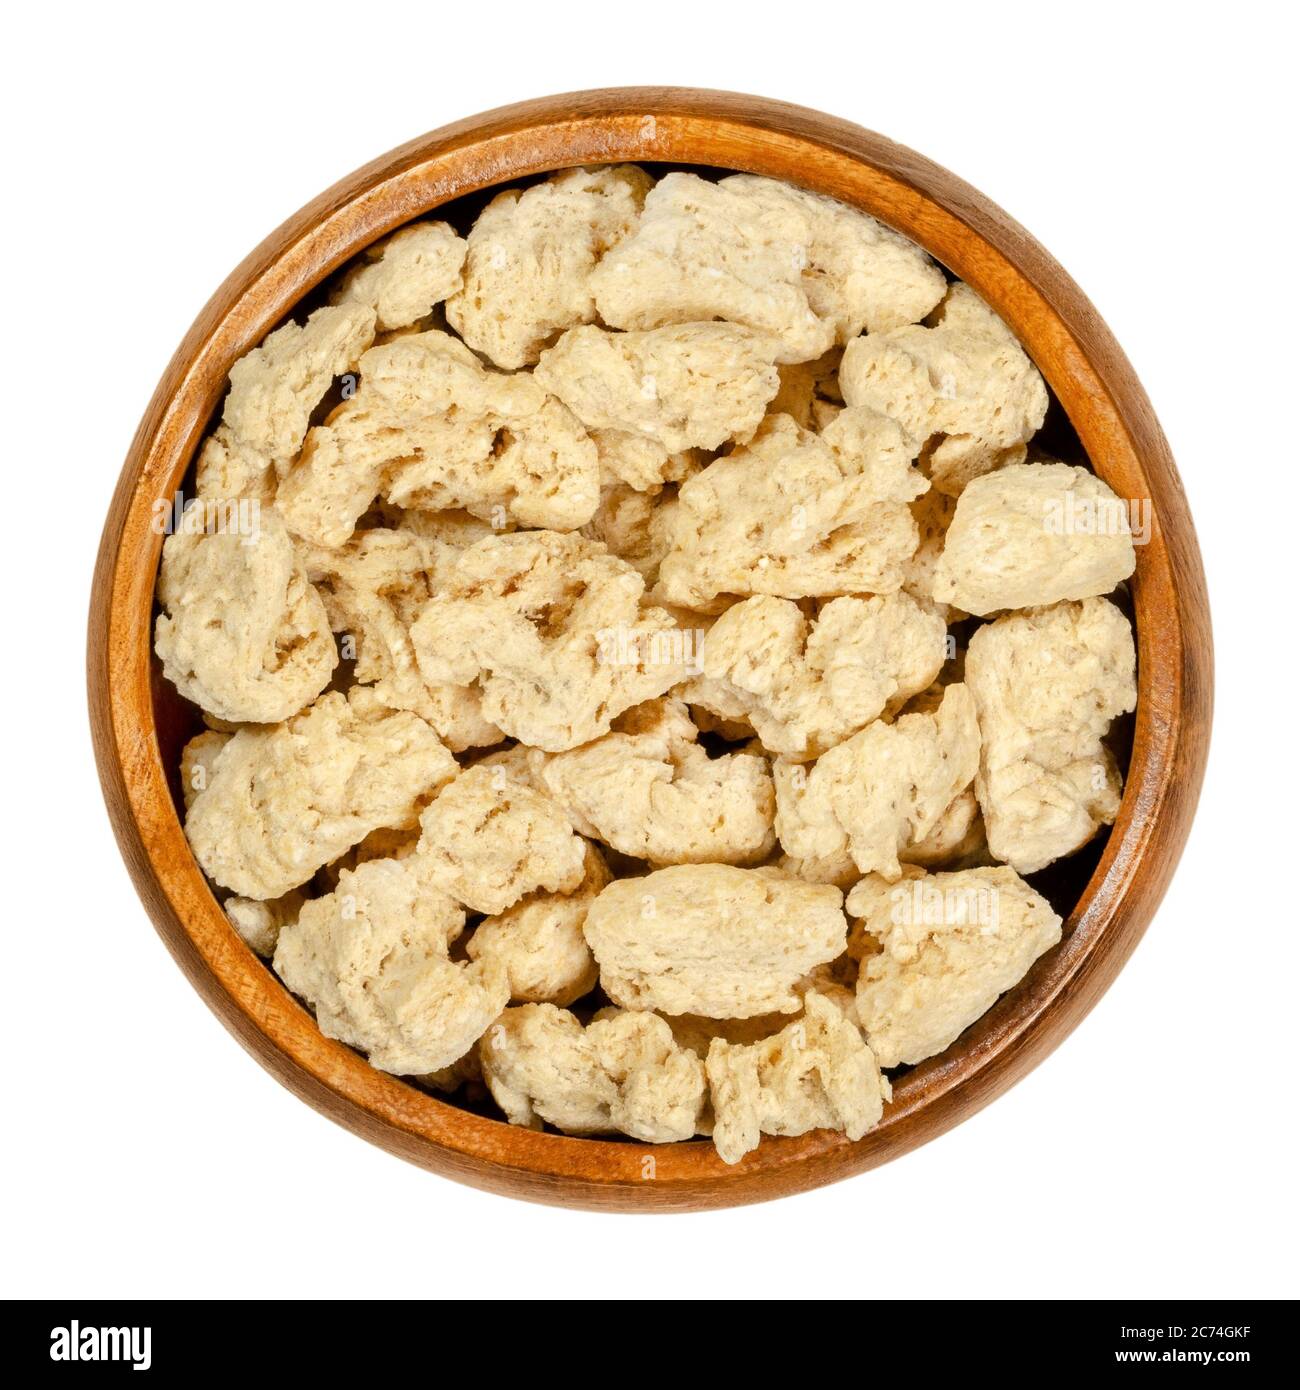 Soya chunks in wooden bowl. Textured soy protein, also known as soy meat. Defatted soy flour product, used as meat analogue or meat extender. Stock Photo